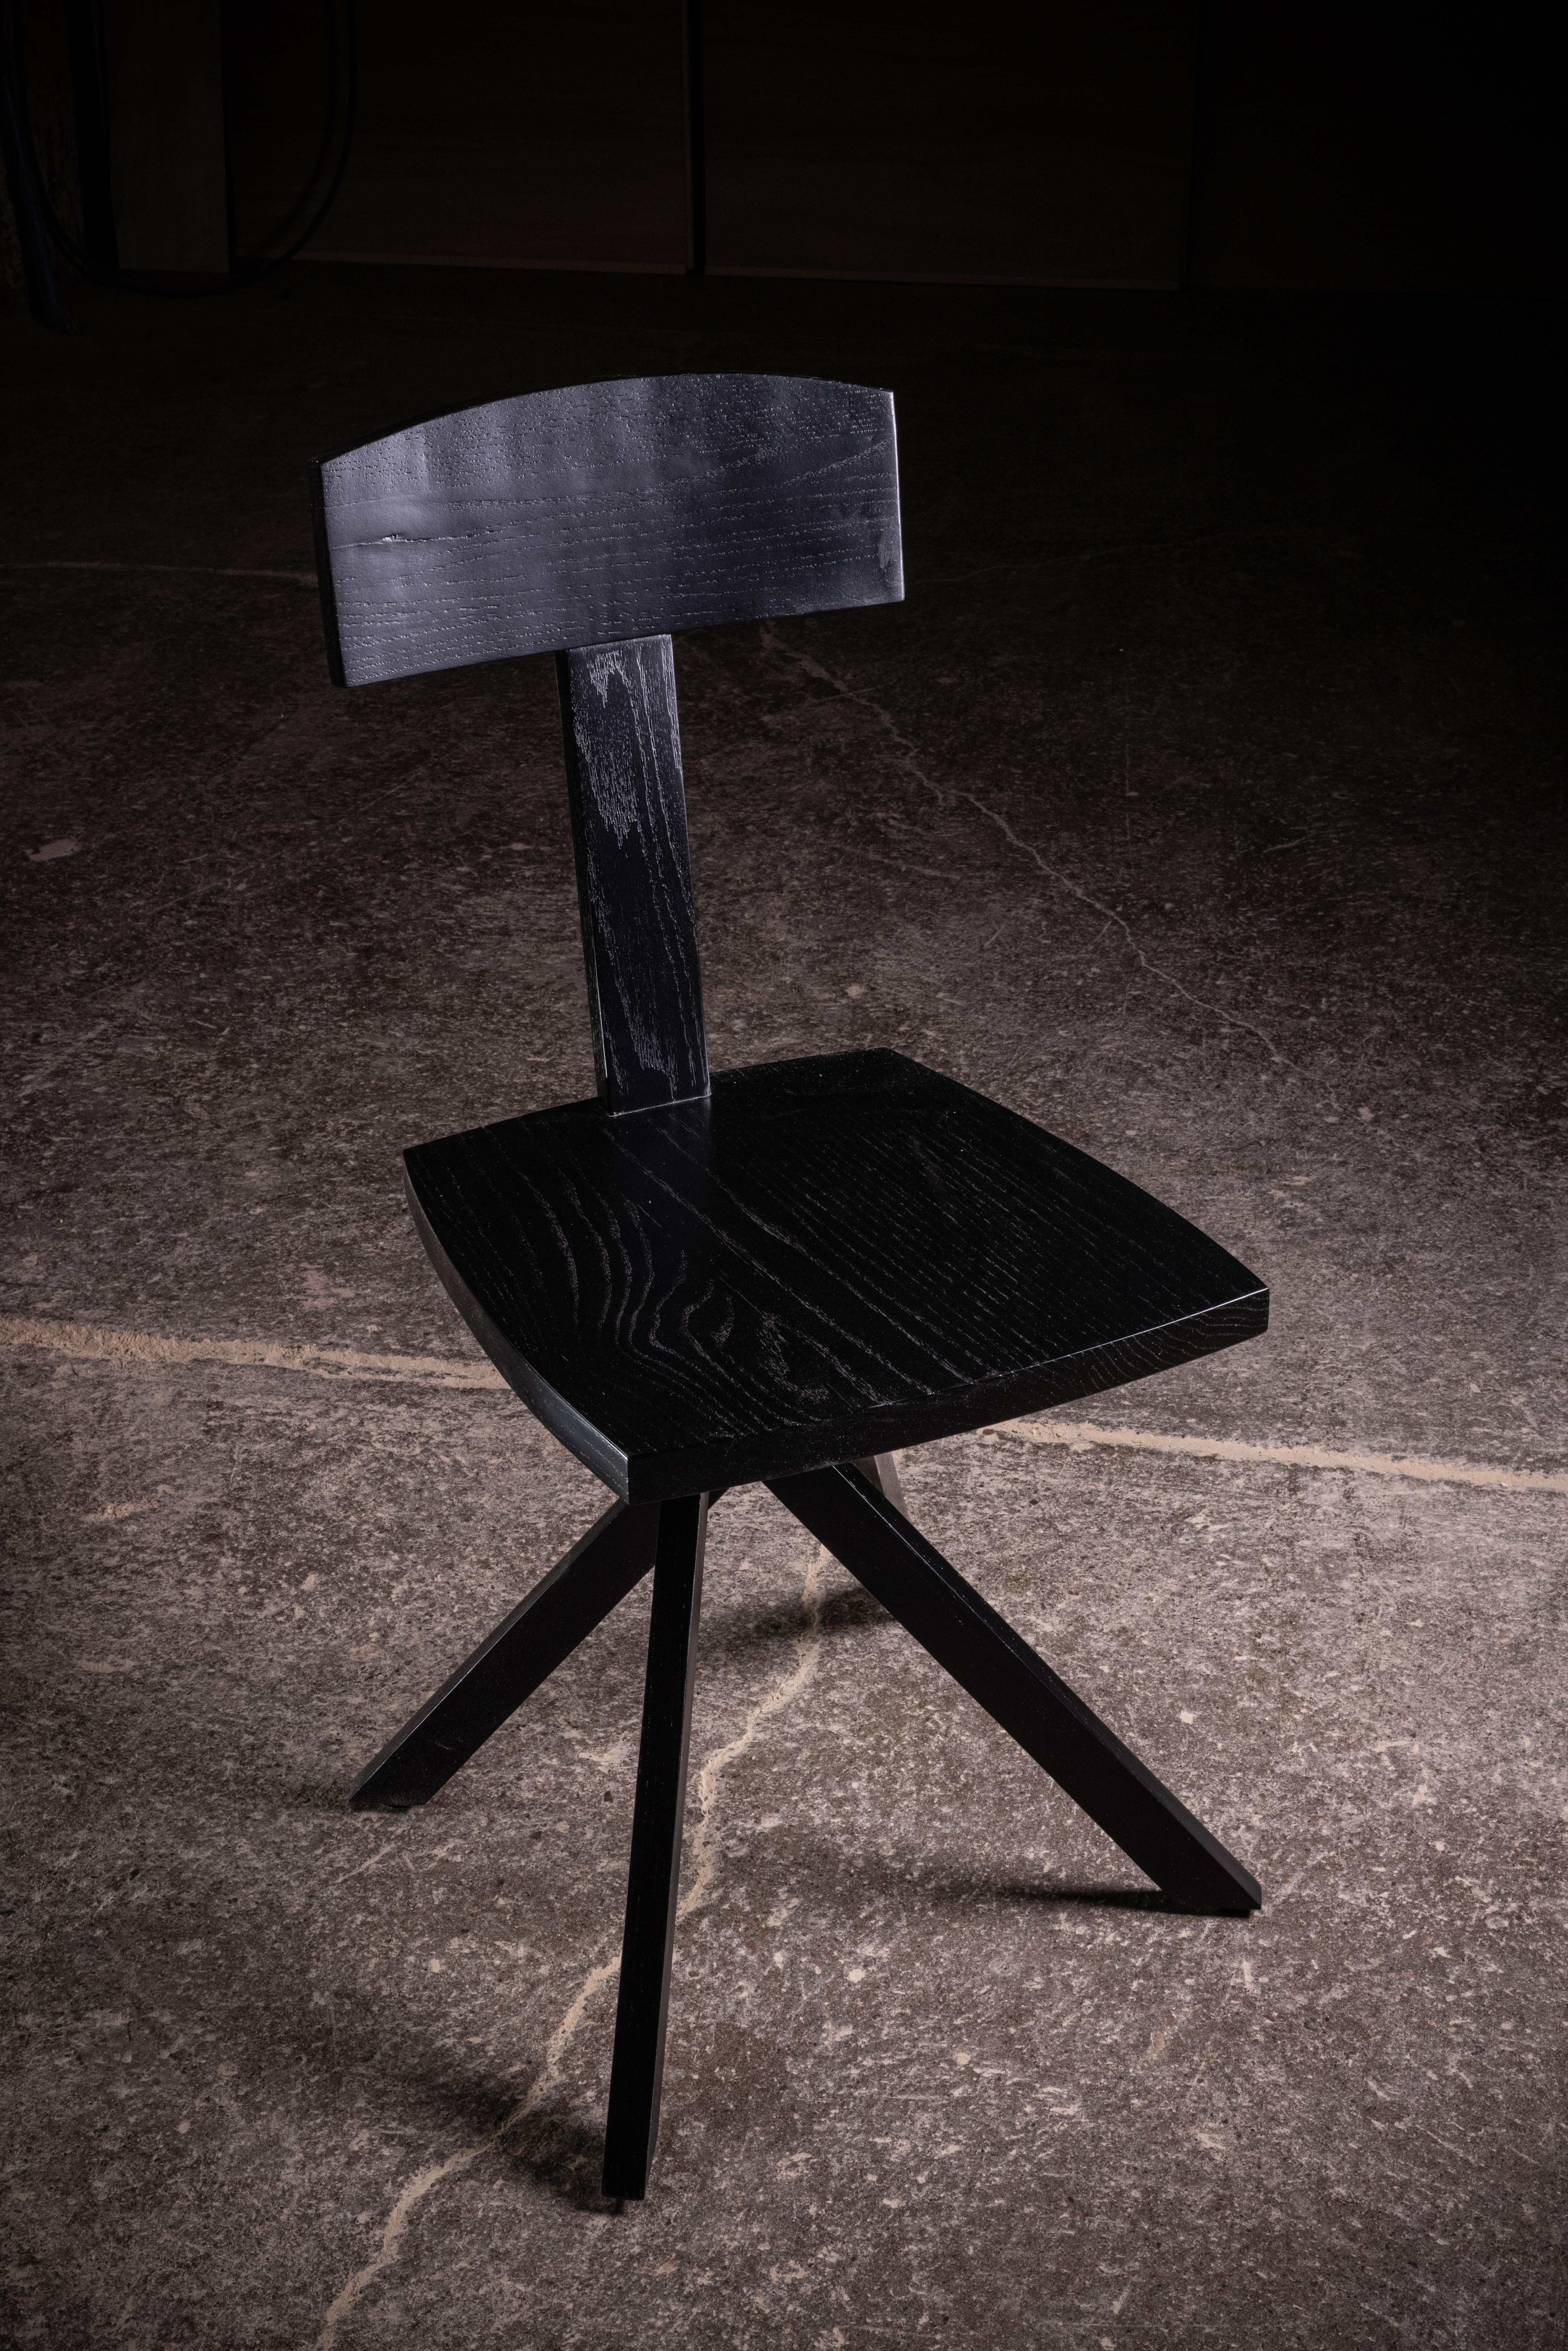 Homage to our favorite chairs.

Sculptural chairs in solid oak.